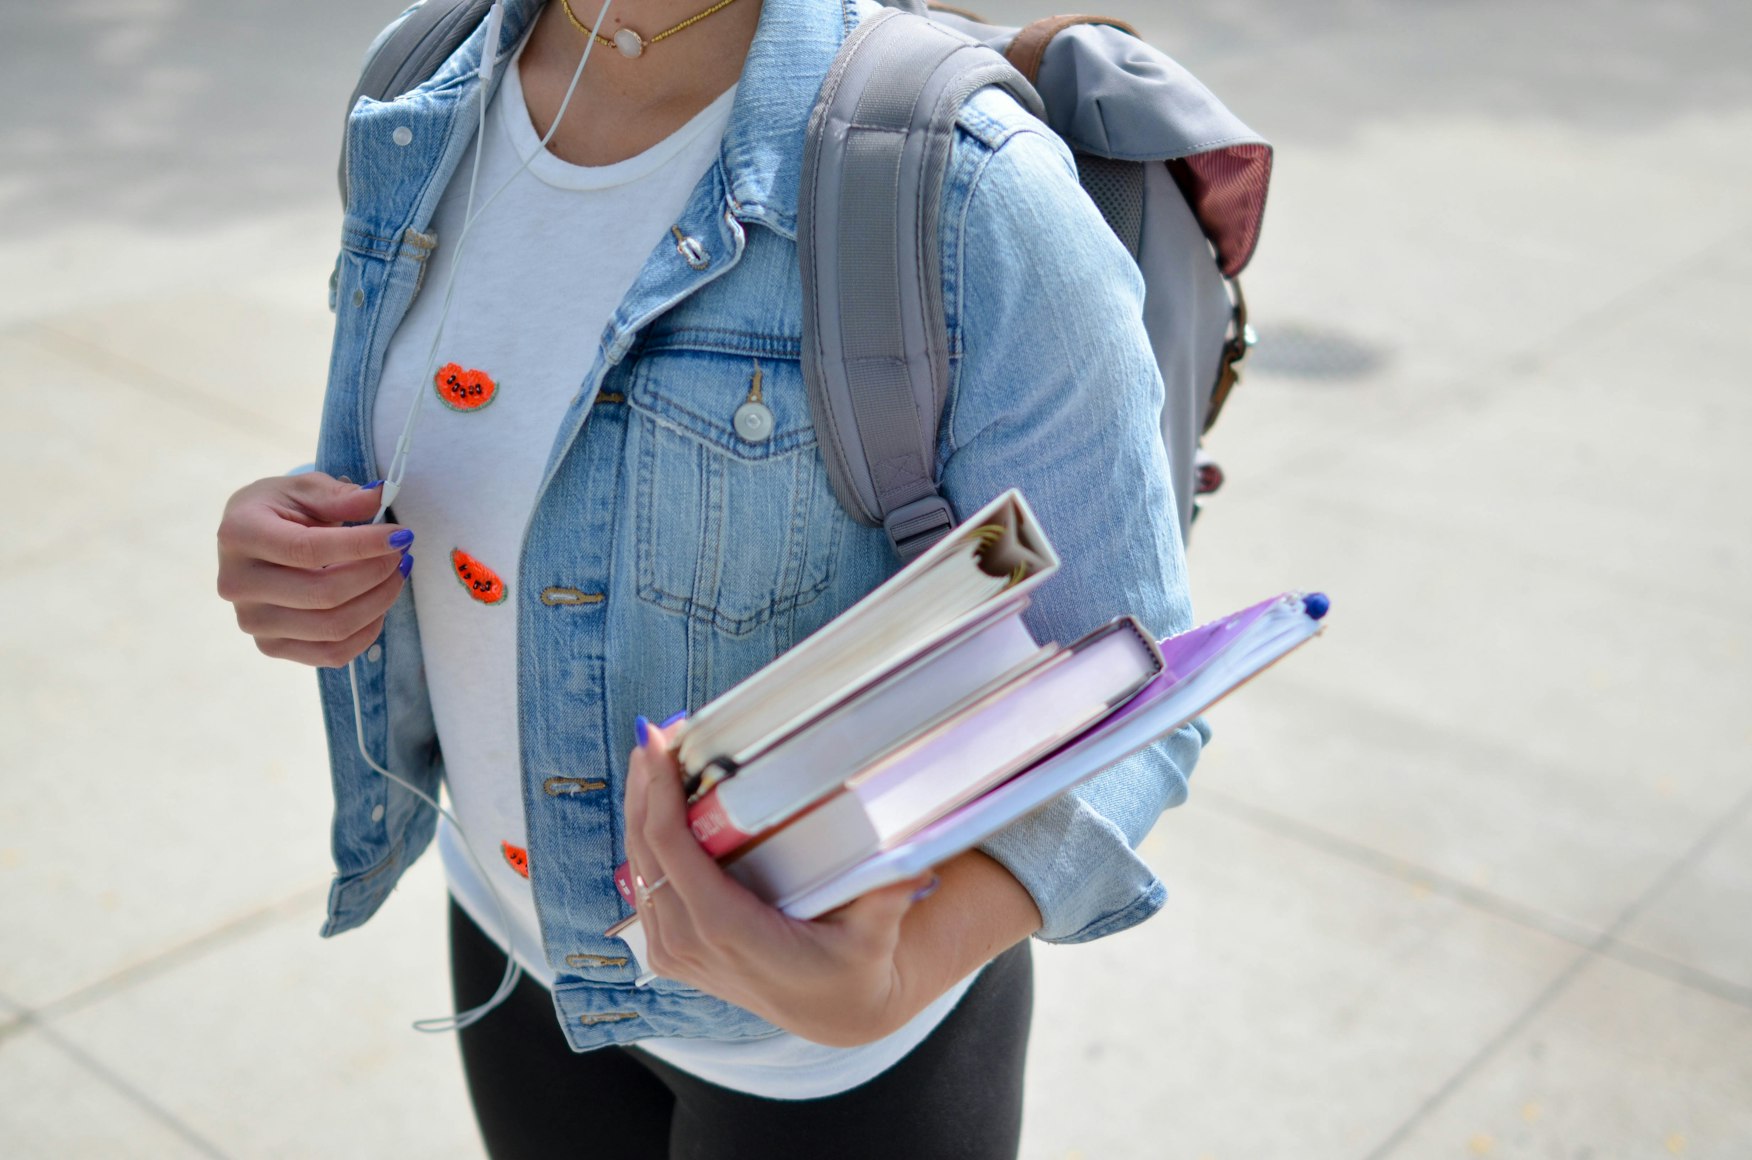 student carrying books and backpack while listening to music